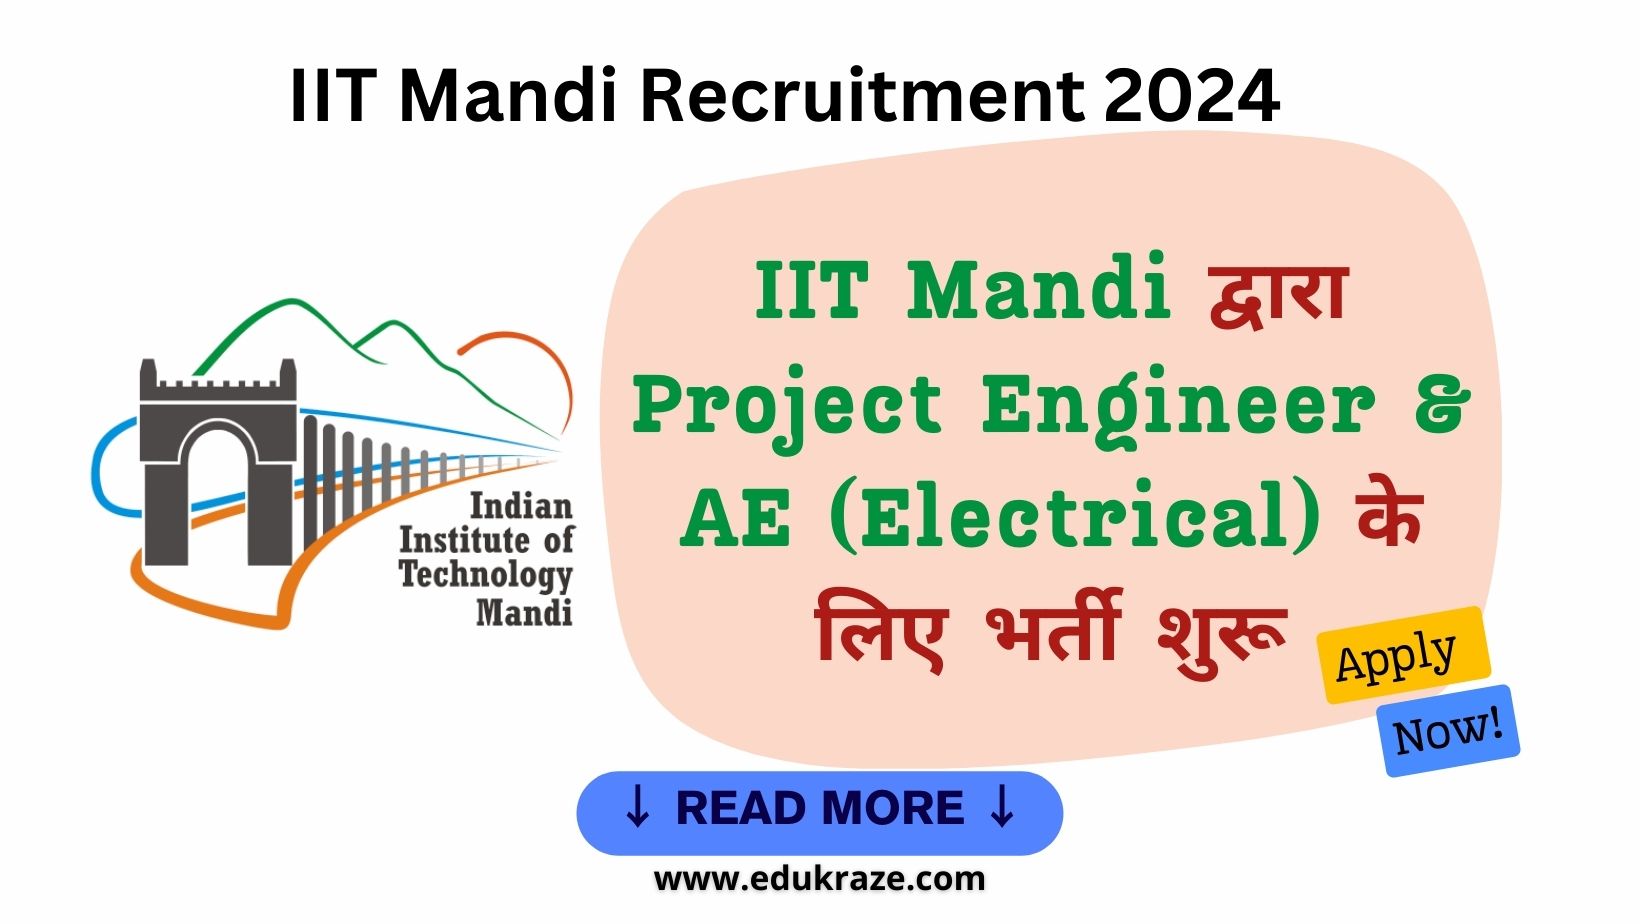 IIT Mandi Recruitment 2024 Out for Project Engineer & AE (Electrical) Positions